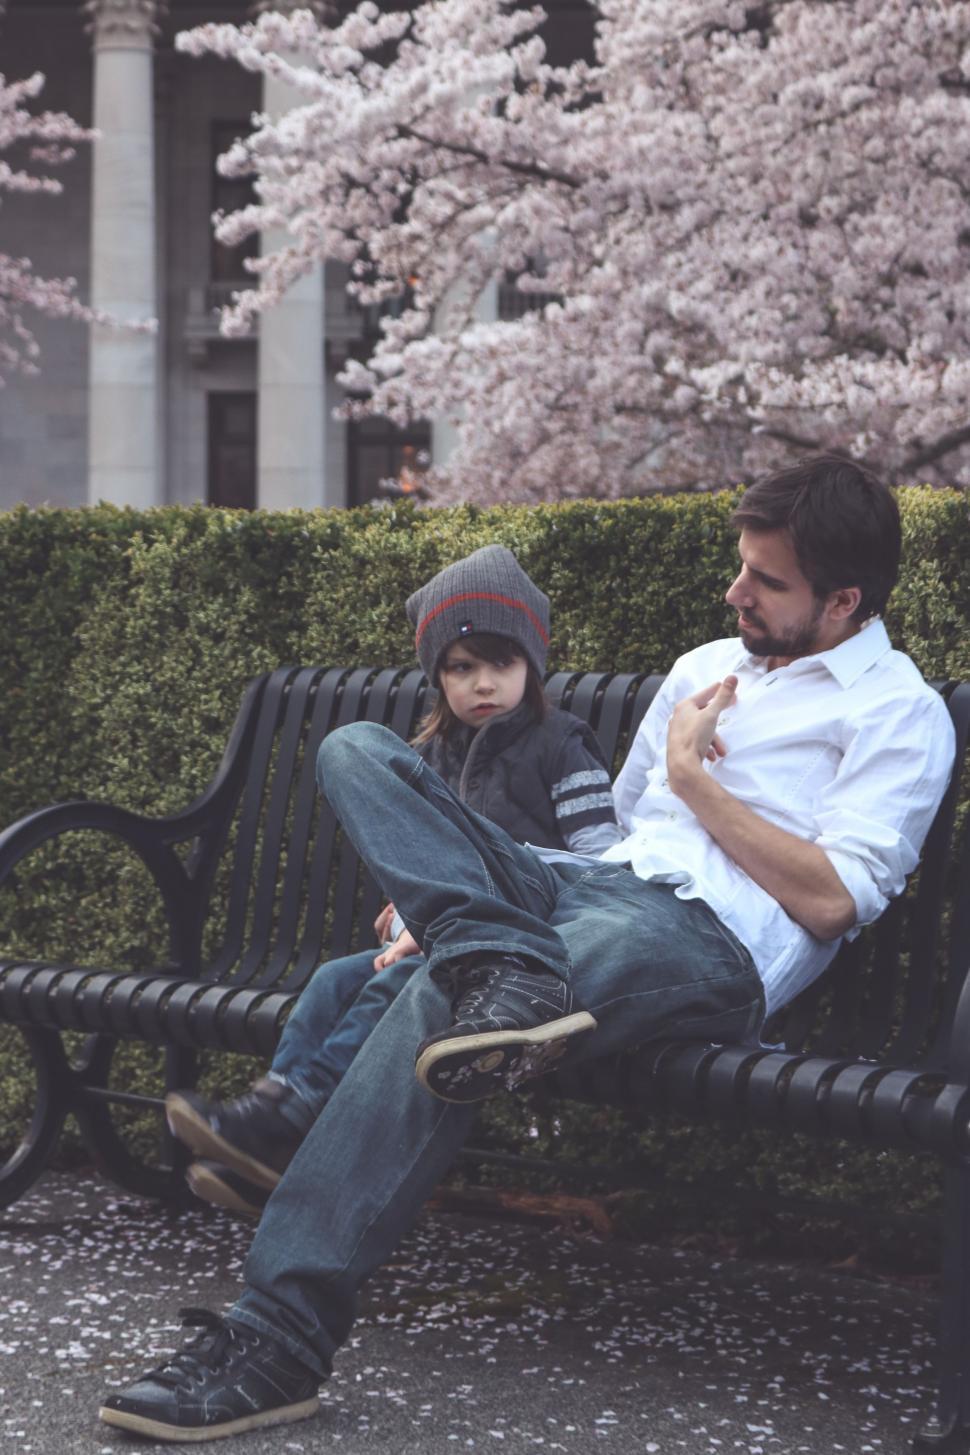 Free Image of Father and Son on Bench With Cherry Blossom Tree  